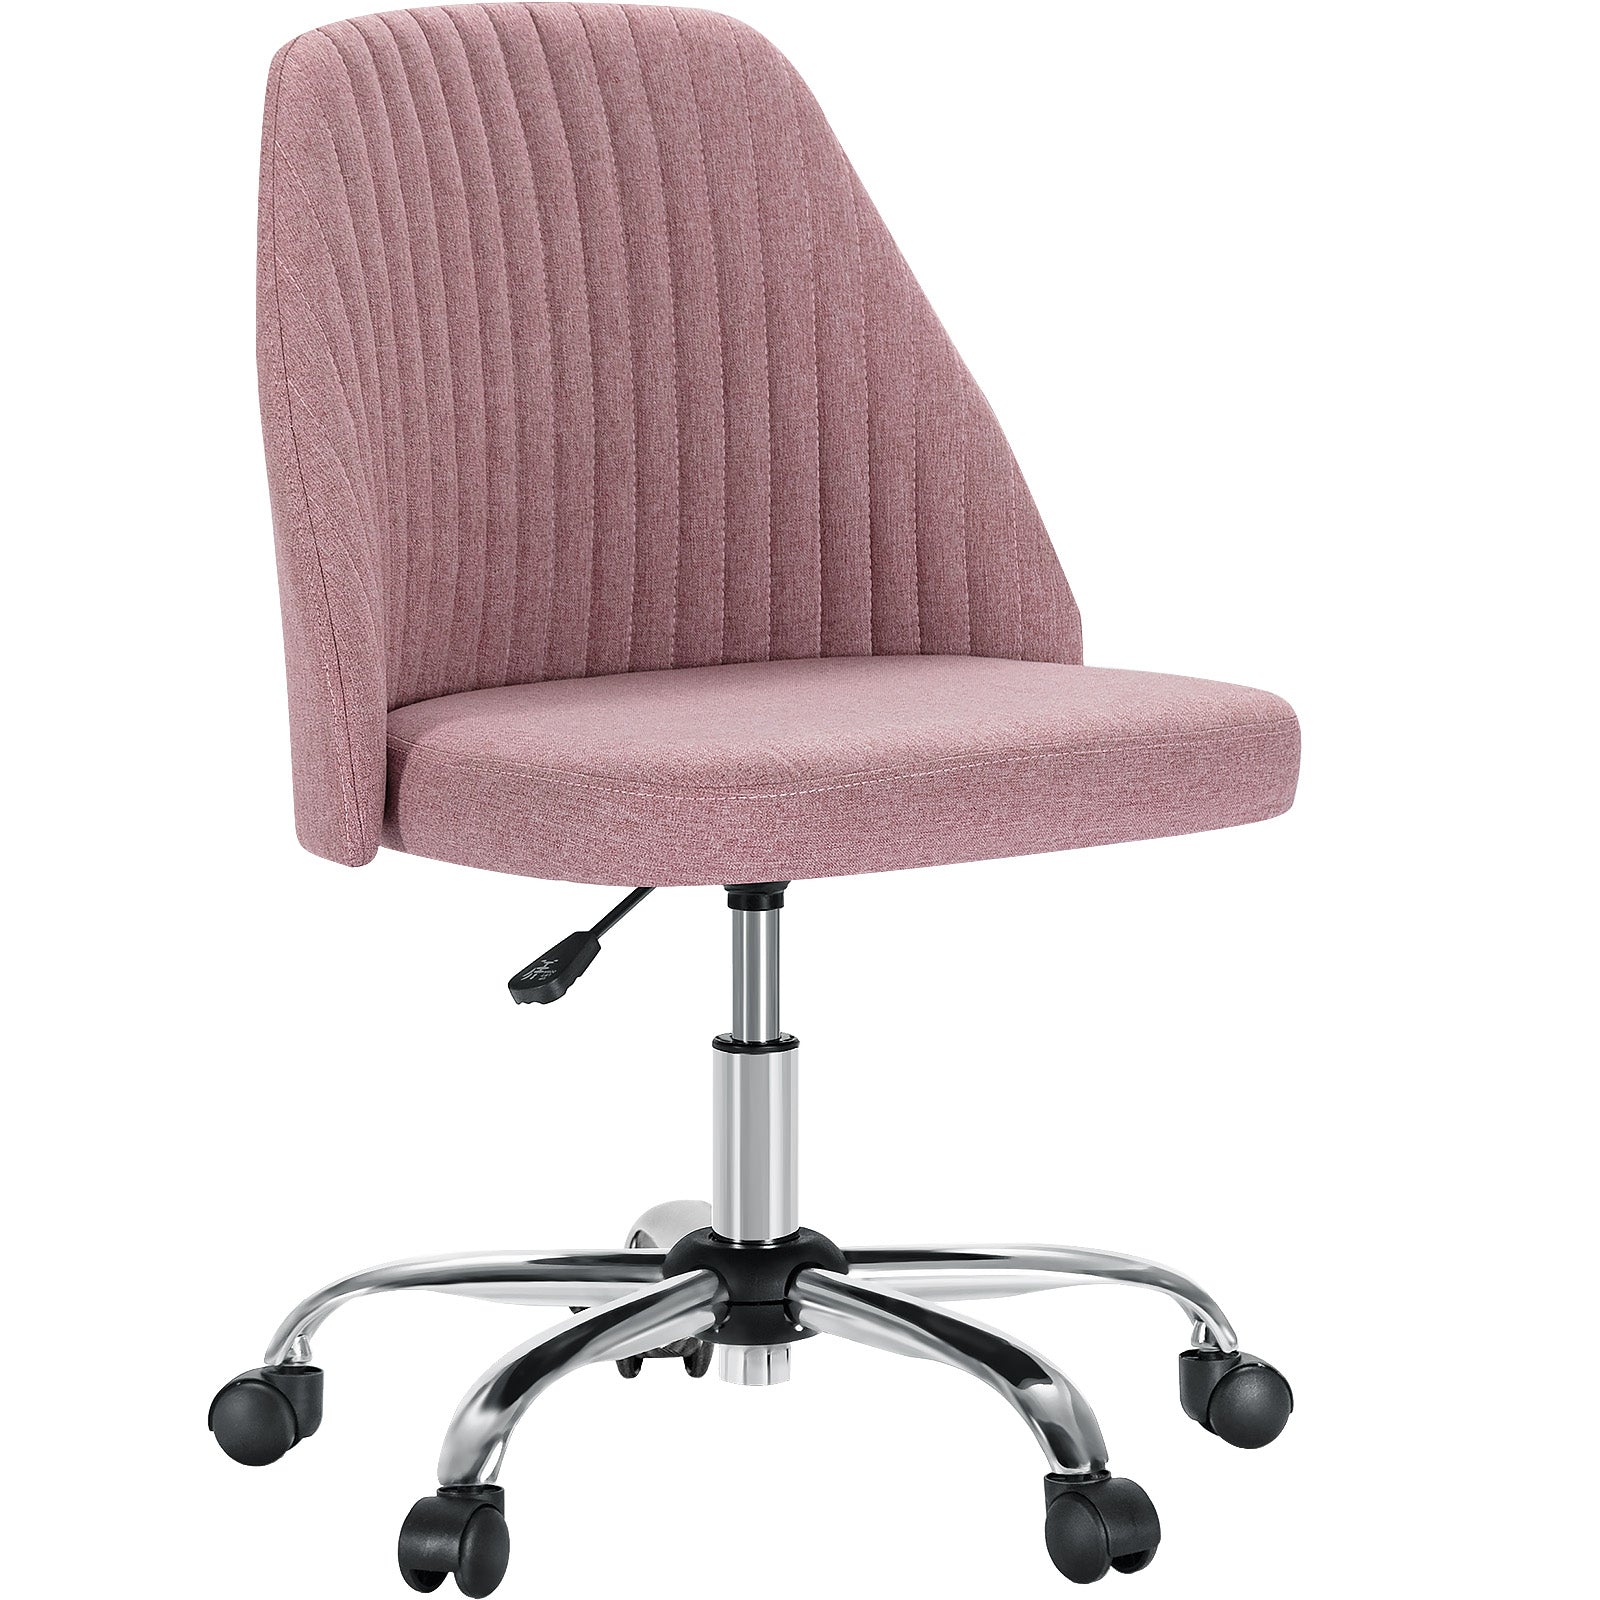 cradle home office swivel armless chair with wheels height adjustableoffice chairs 699106